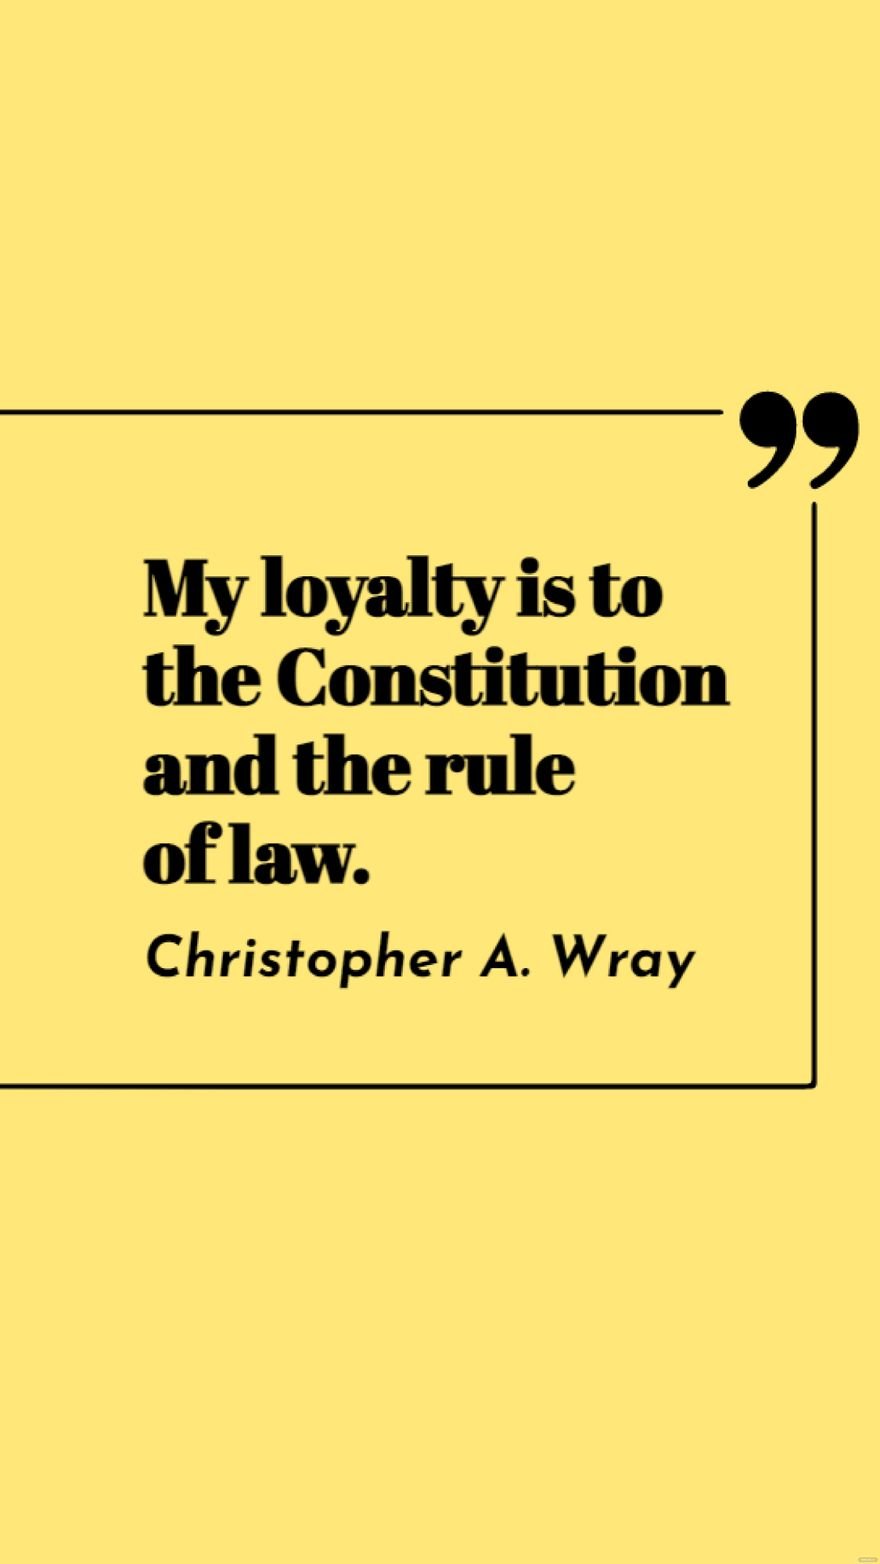 Christopher A. Wray - My loyalty is to the Constitution and the rule of law.